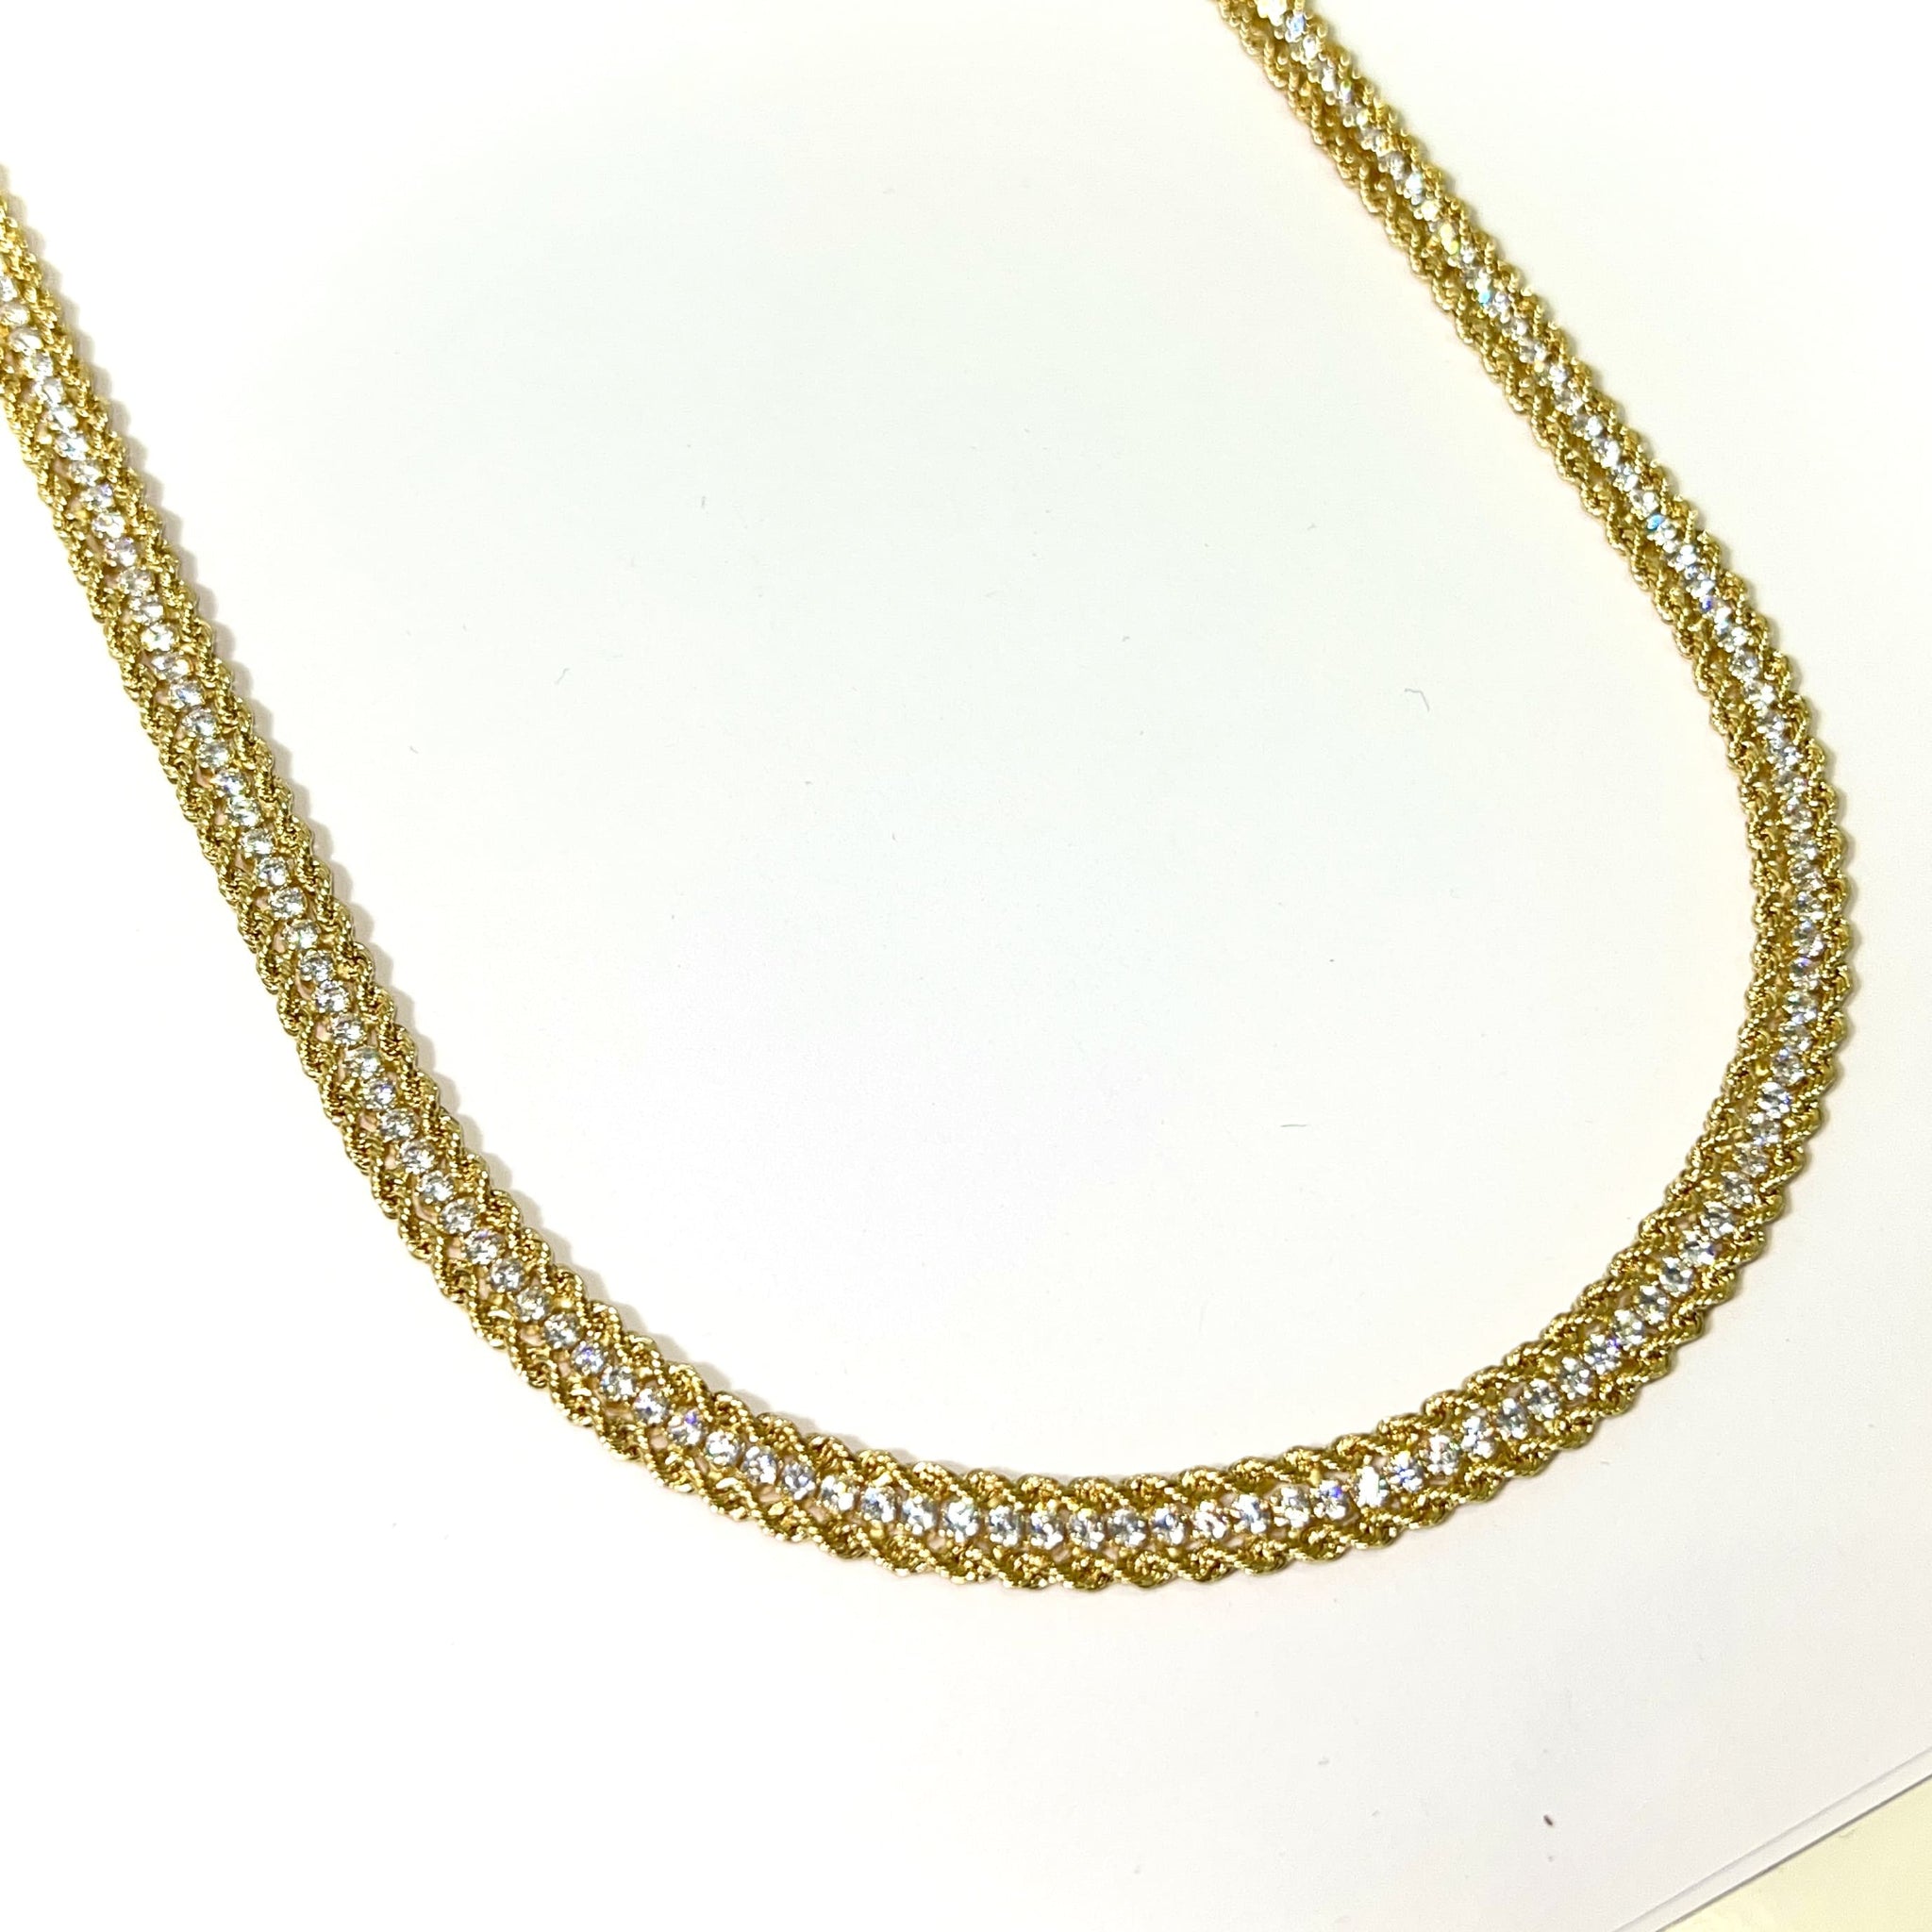 Rope Chain - 18 Carat Gold - 45cm / 7mm - 303